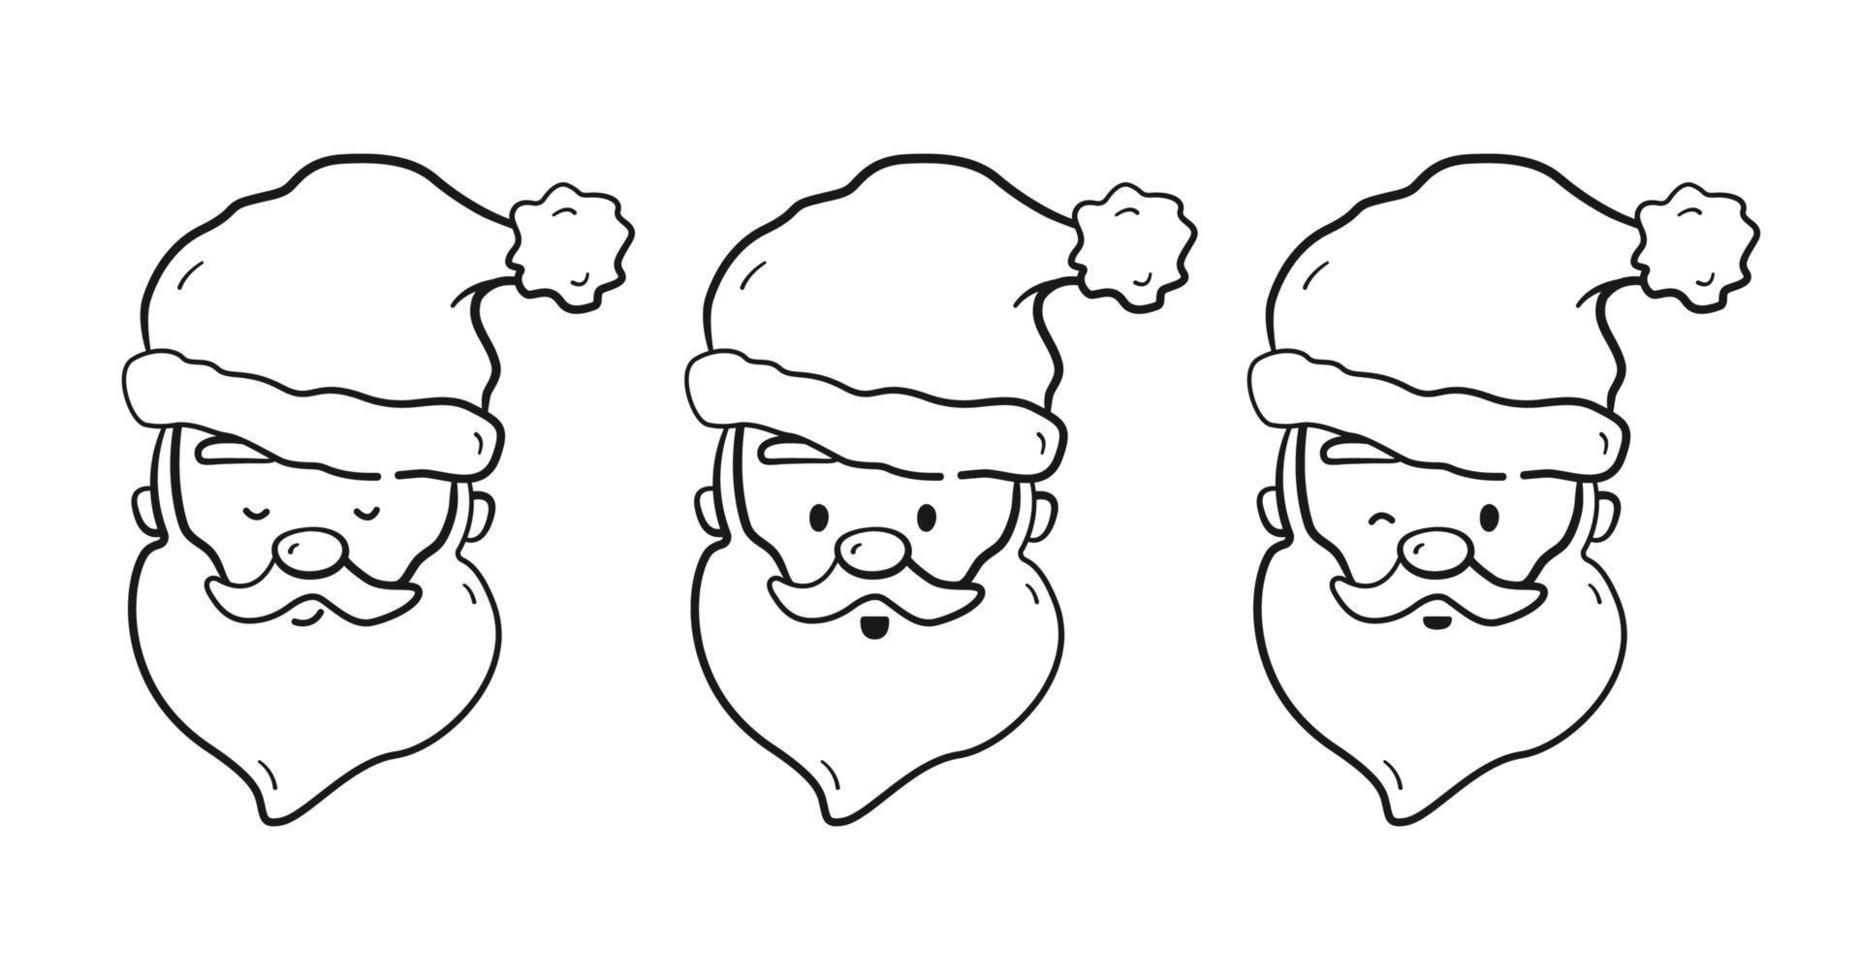 Set of Santa Claus faces. Christmas santa claus character with different face emotions in black linear drawing style. Vector illustration